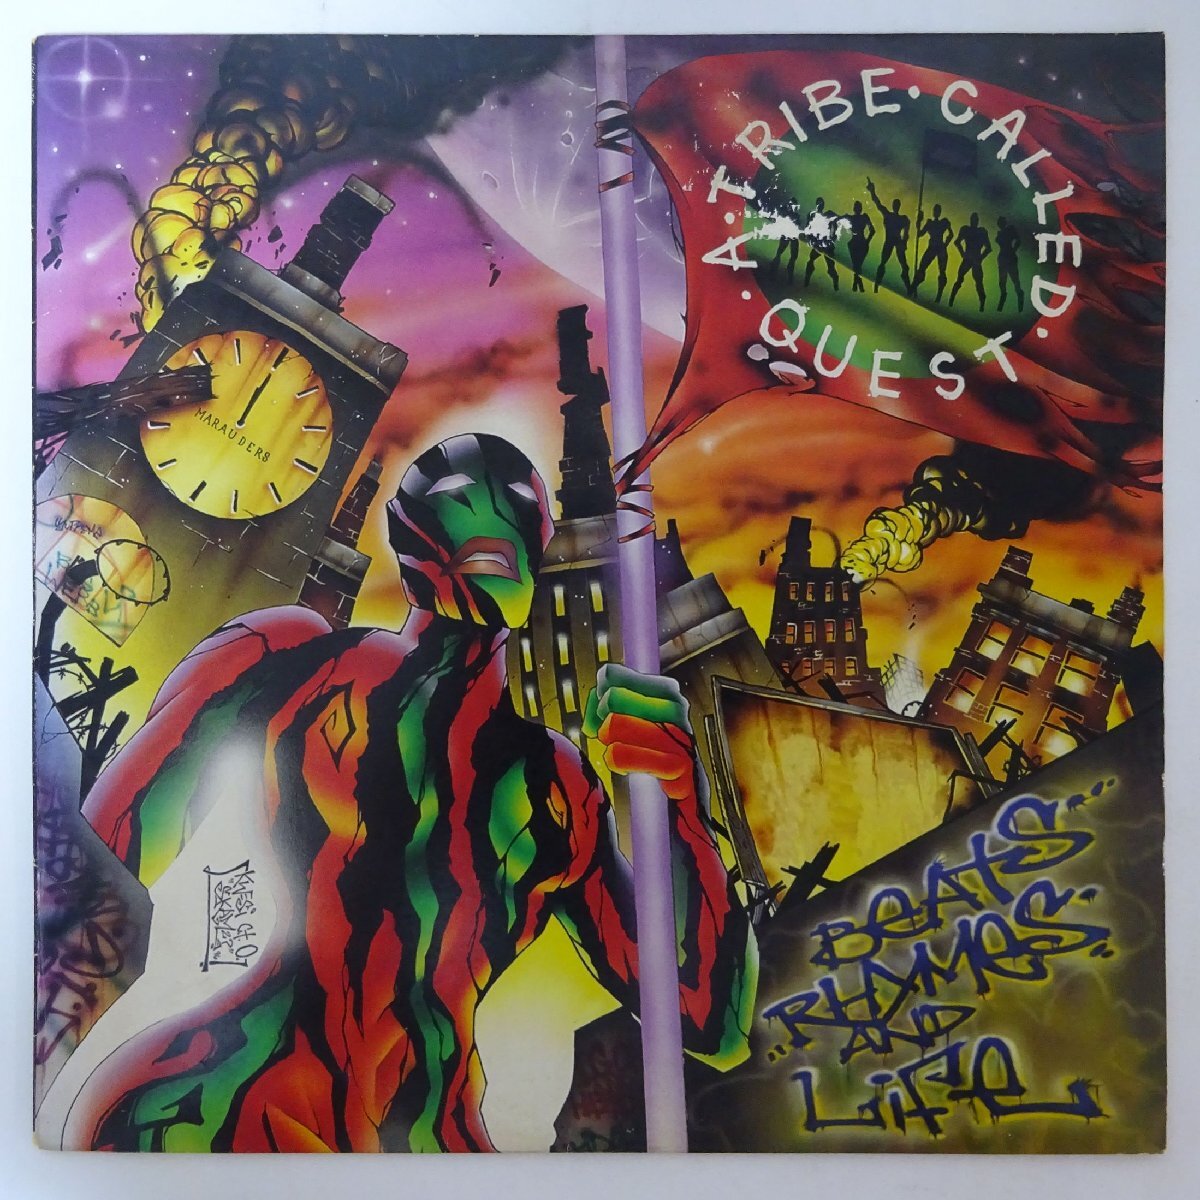 14031677;[US original /2LP]A Tribe Called Quest (Q-Tip, Phife Dawg, Ali Shaheed Muhammad) / Beats, Rhymes And Life